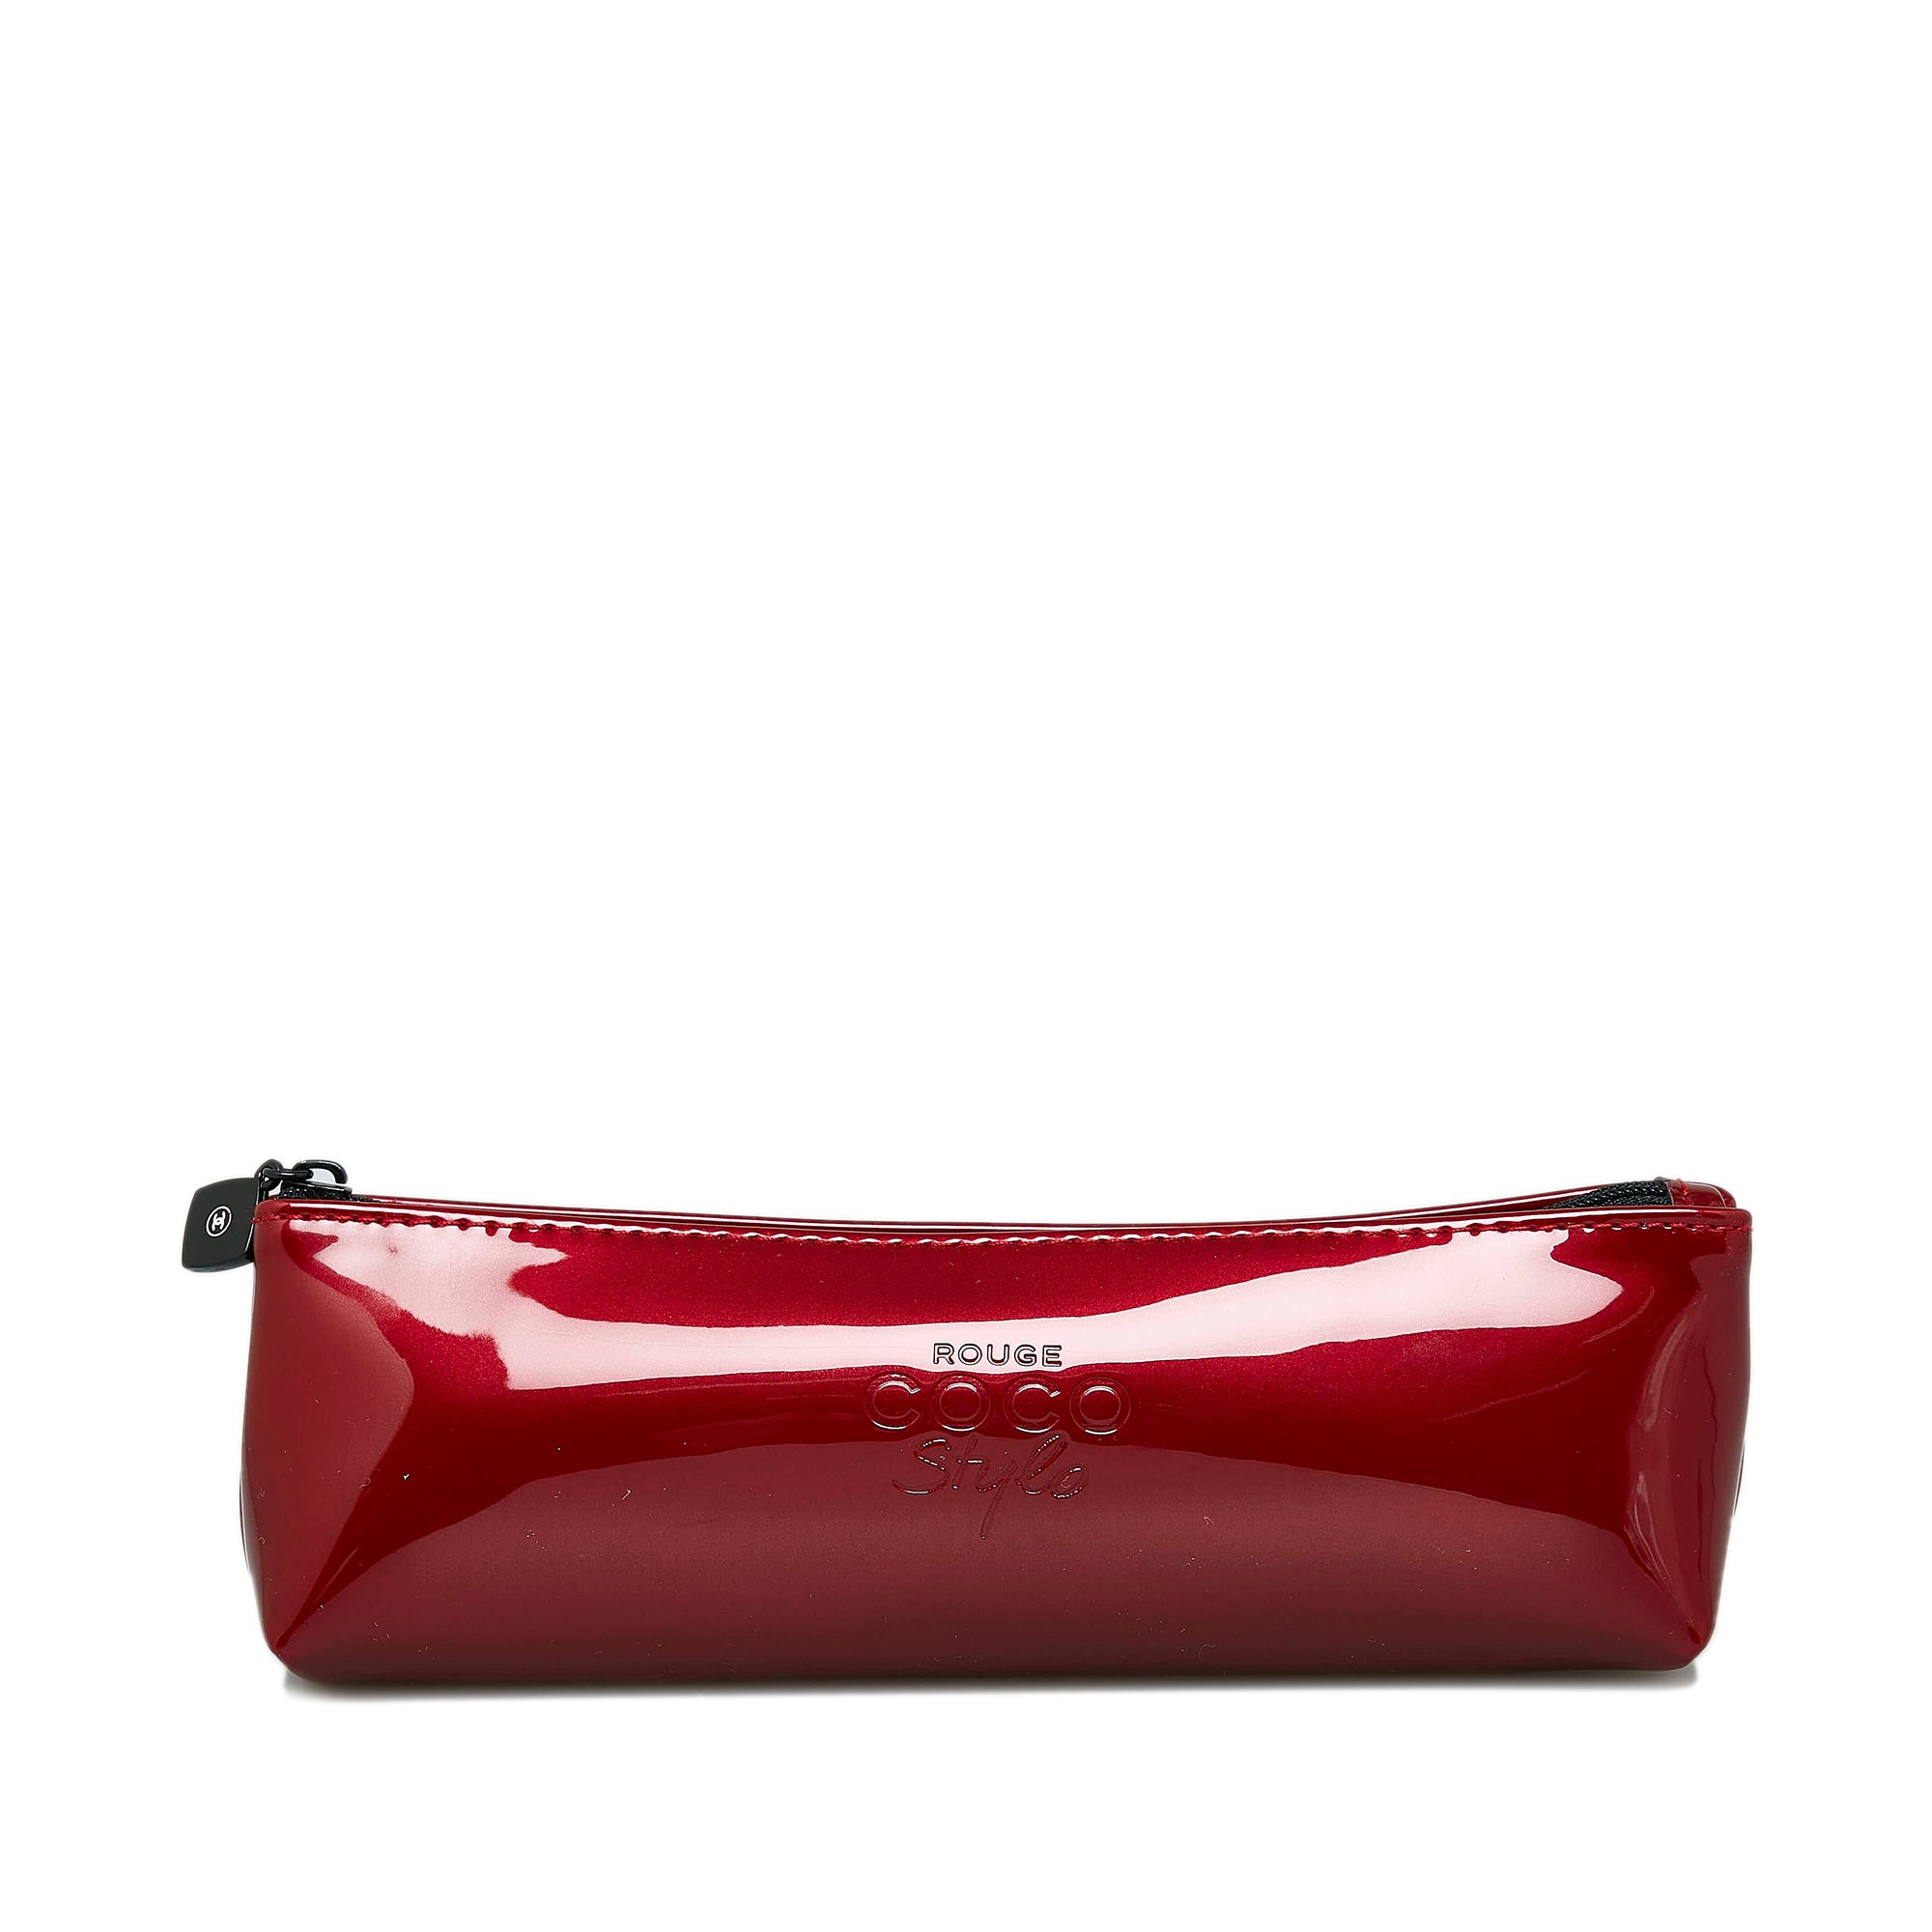 chanel red cosmetic bag